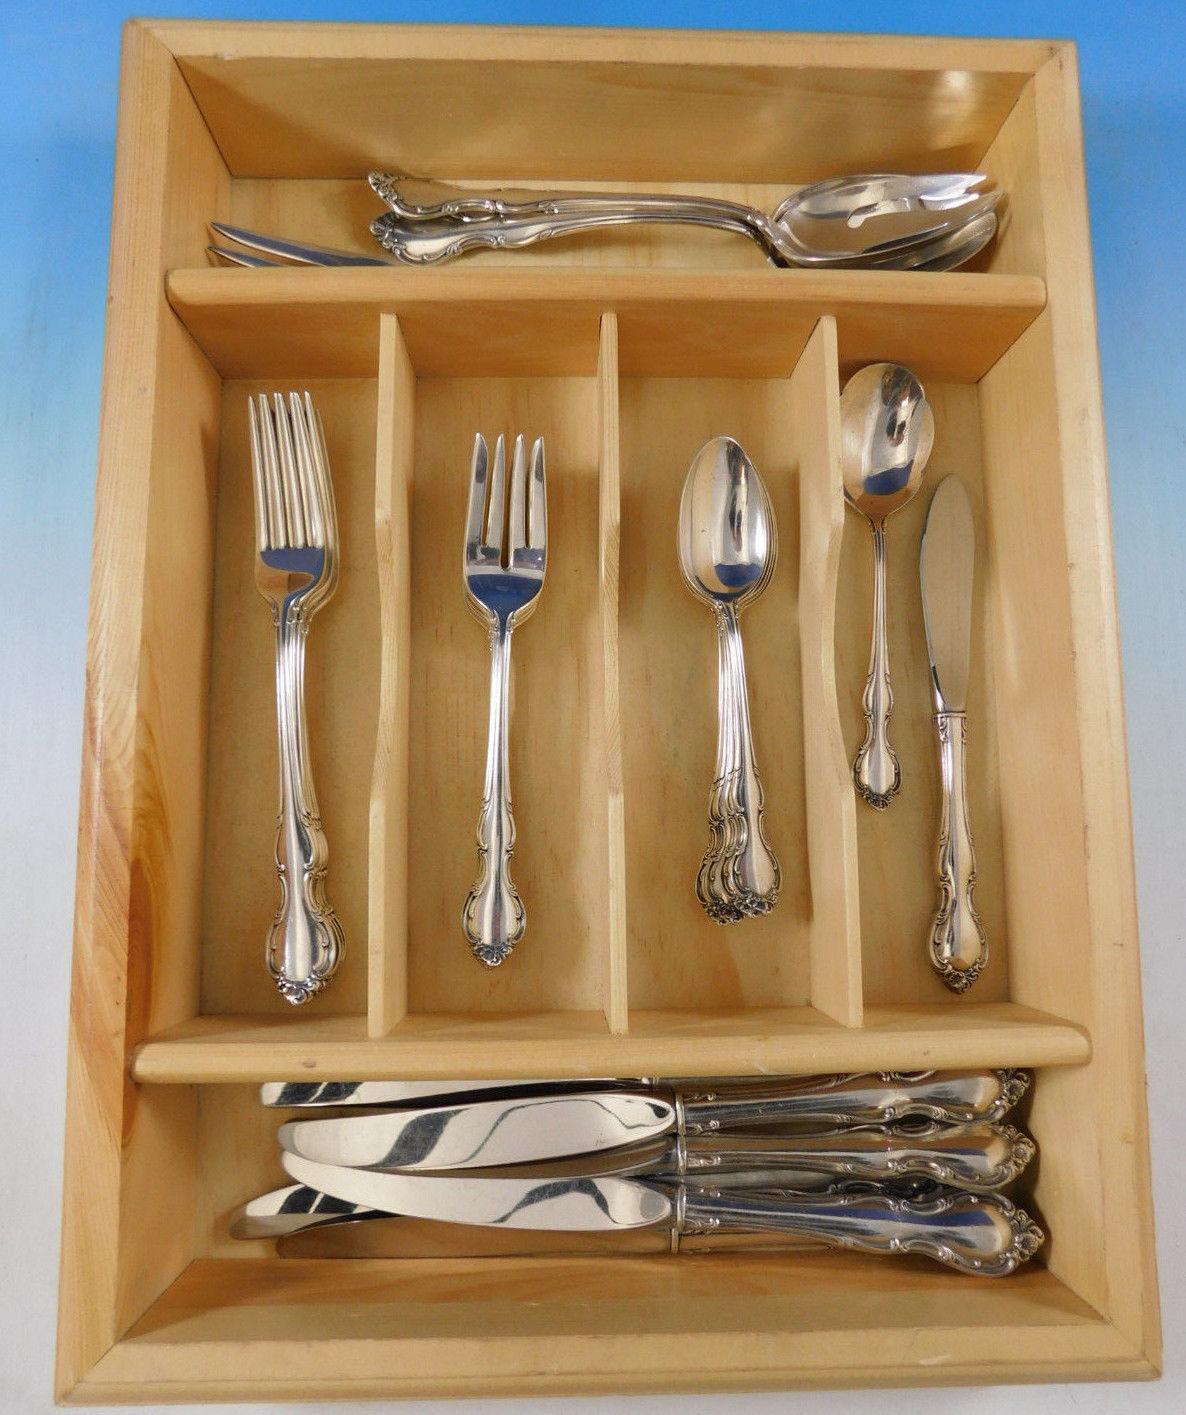 Pirouette by Alvin sterling silver flatware set, 30 pieces. Great starter set! This set includes:

6 knives, 9 1/4